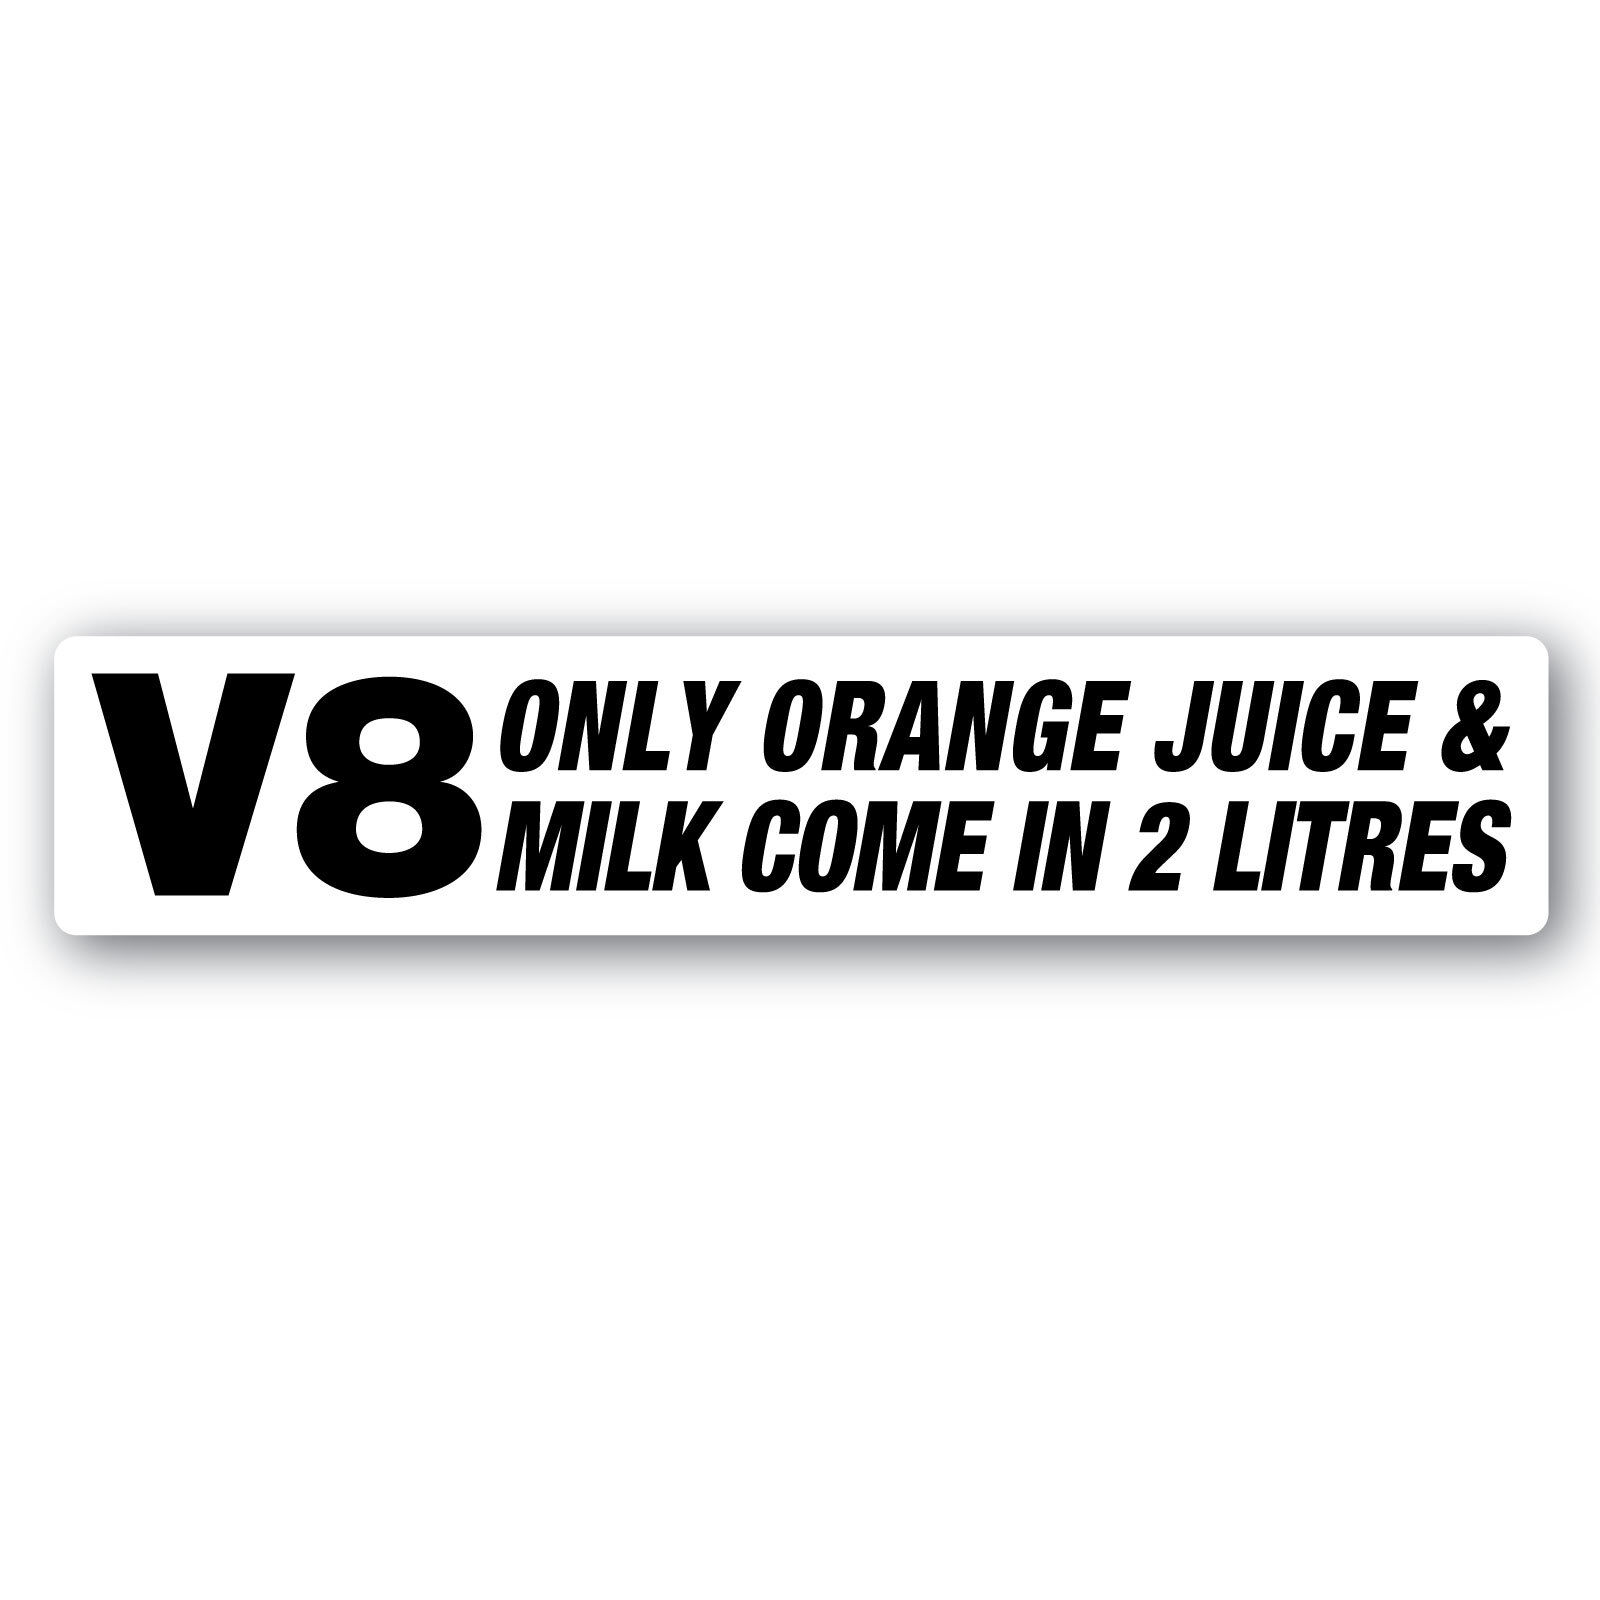 V8 Only Milk & Juice in 2L Sticker 200mm quality vinyl water & fade proof